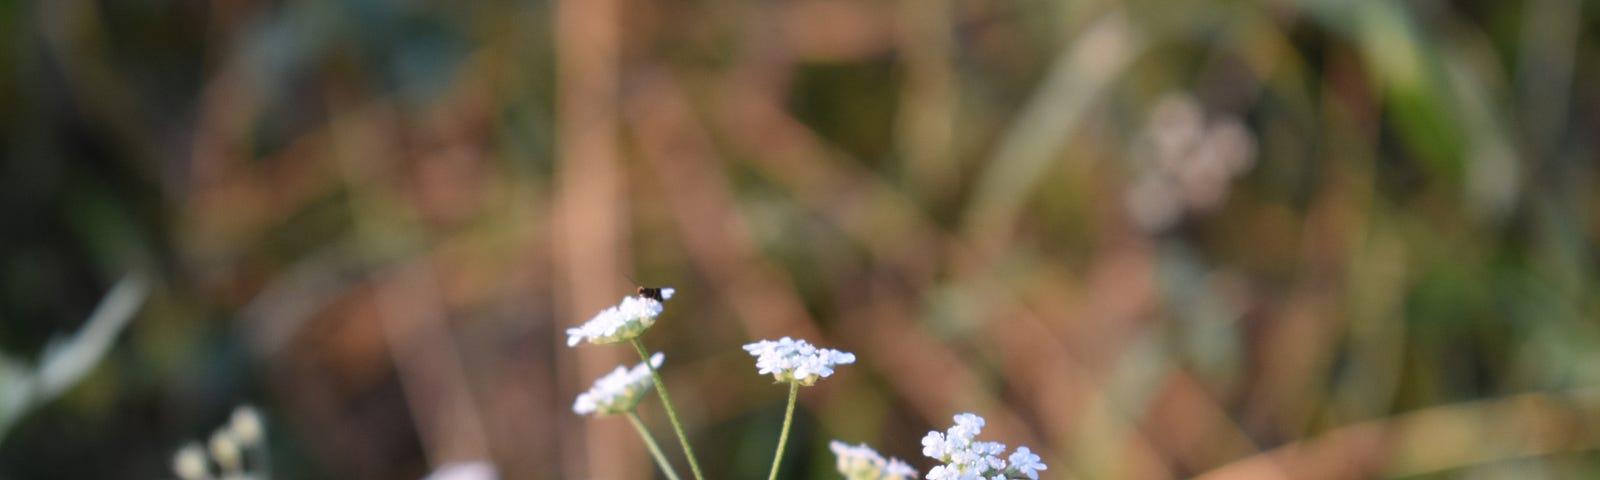 Delicate white wildflower in foreground with a semi-abstract background of out of focus foliage.